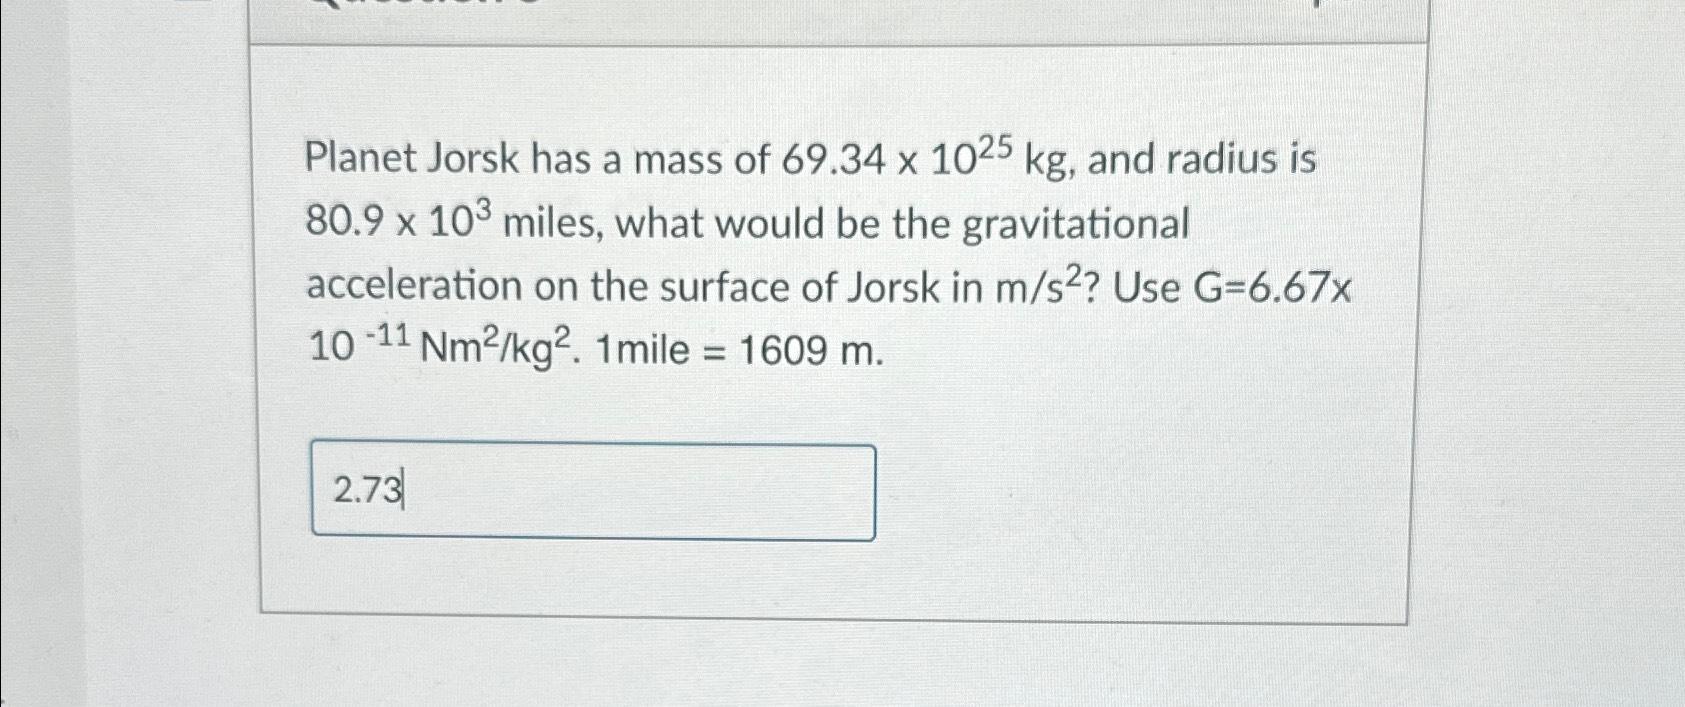 Planet Jorsk has a mass of 69.34 x 1025 kg, and radius is 80.9 x 103 miles, what would be the gravitational